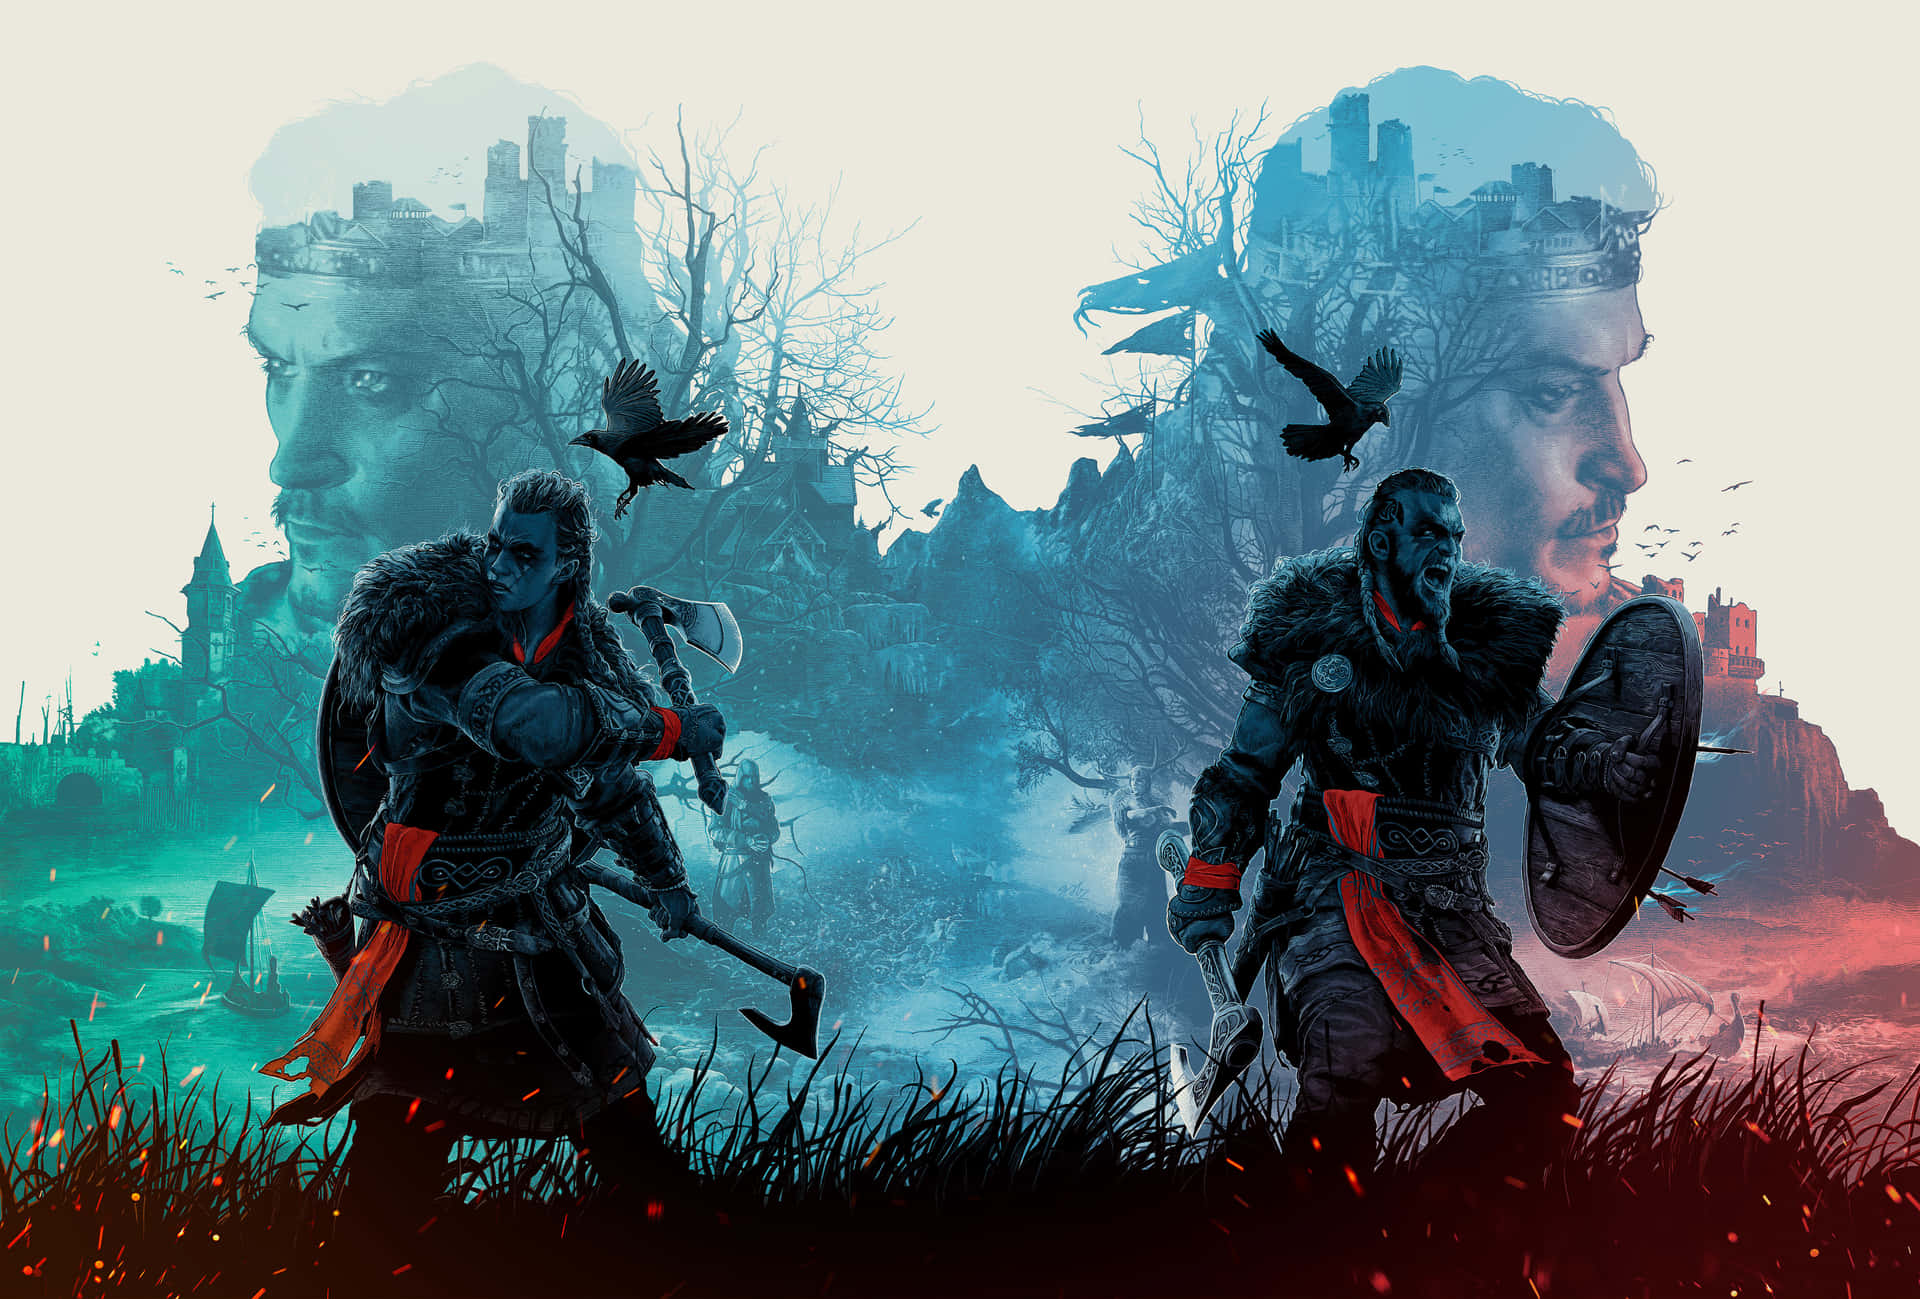 THE WITCHER 2 - Other & Video Games Background Wallpapers on